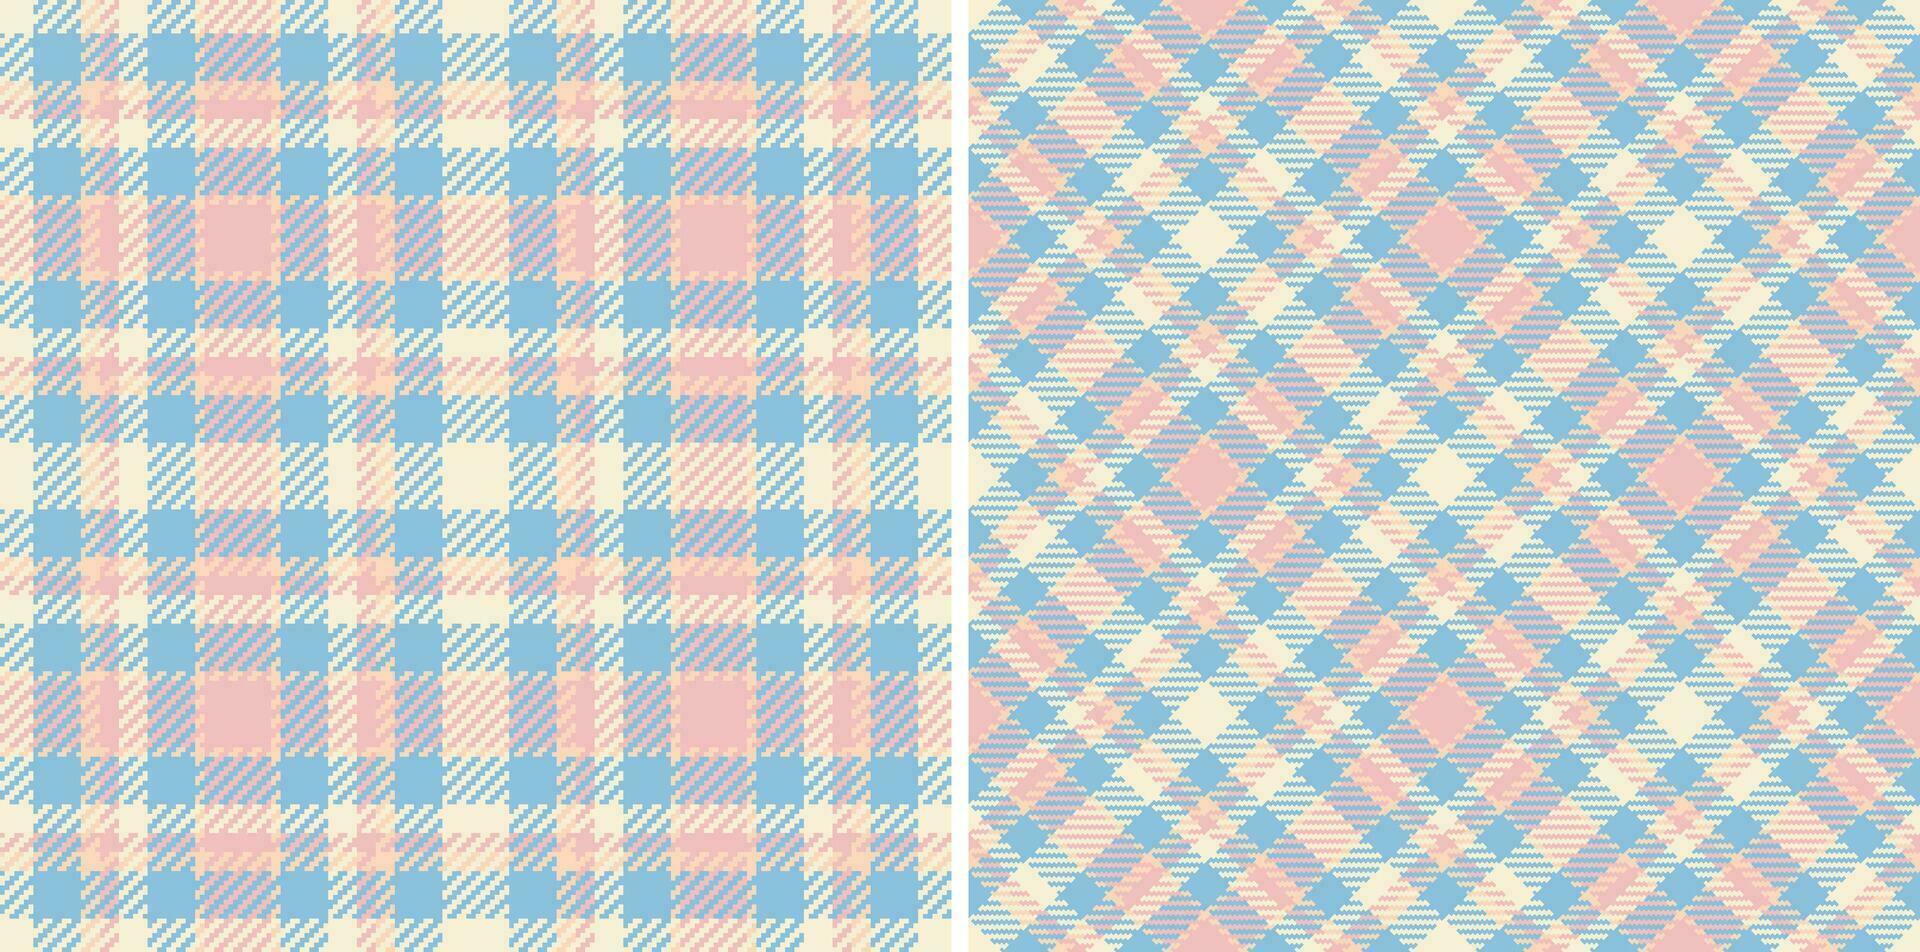 Plaid check textile of background tartan vector with a pattern seamless fabric texture.